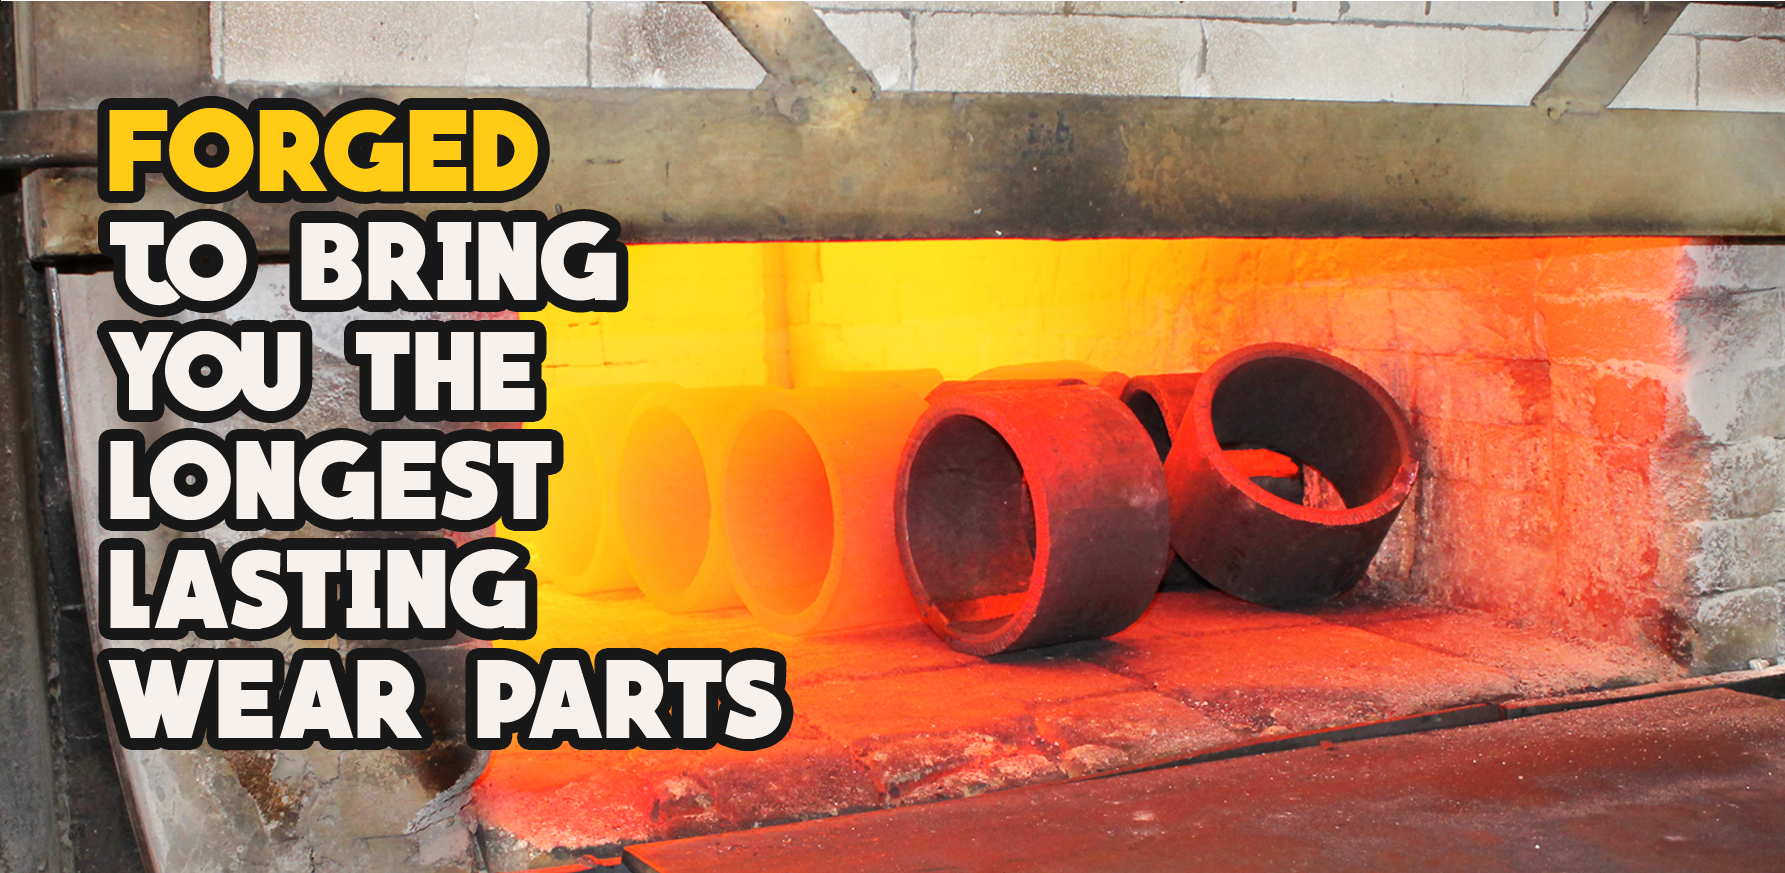 Forged to Bring You the Longest Last Wear Parts by Wescott Steel